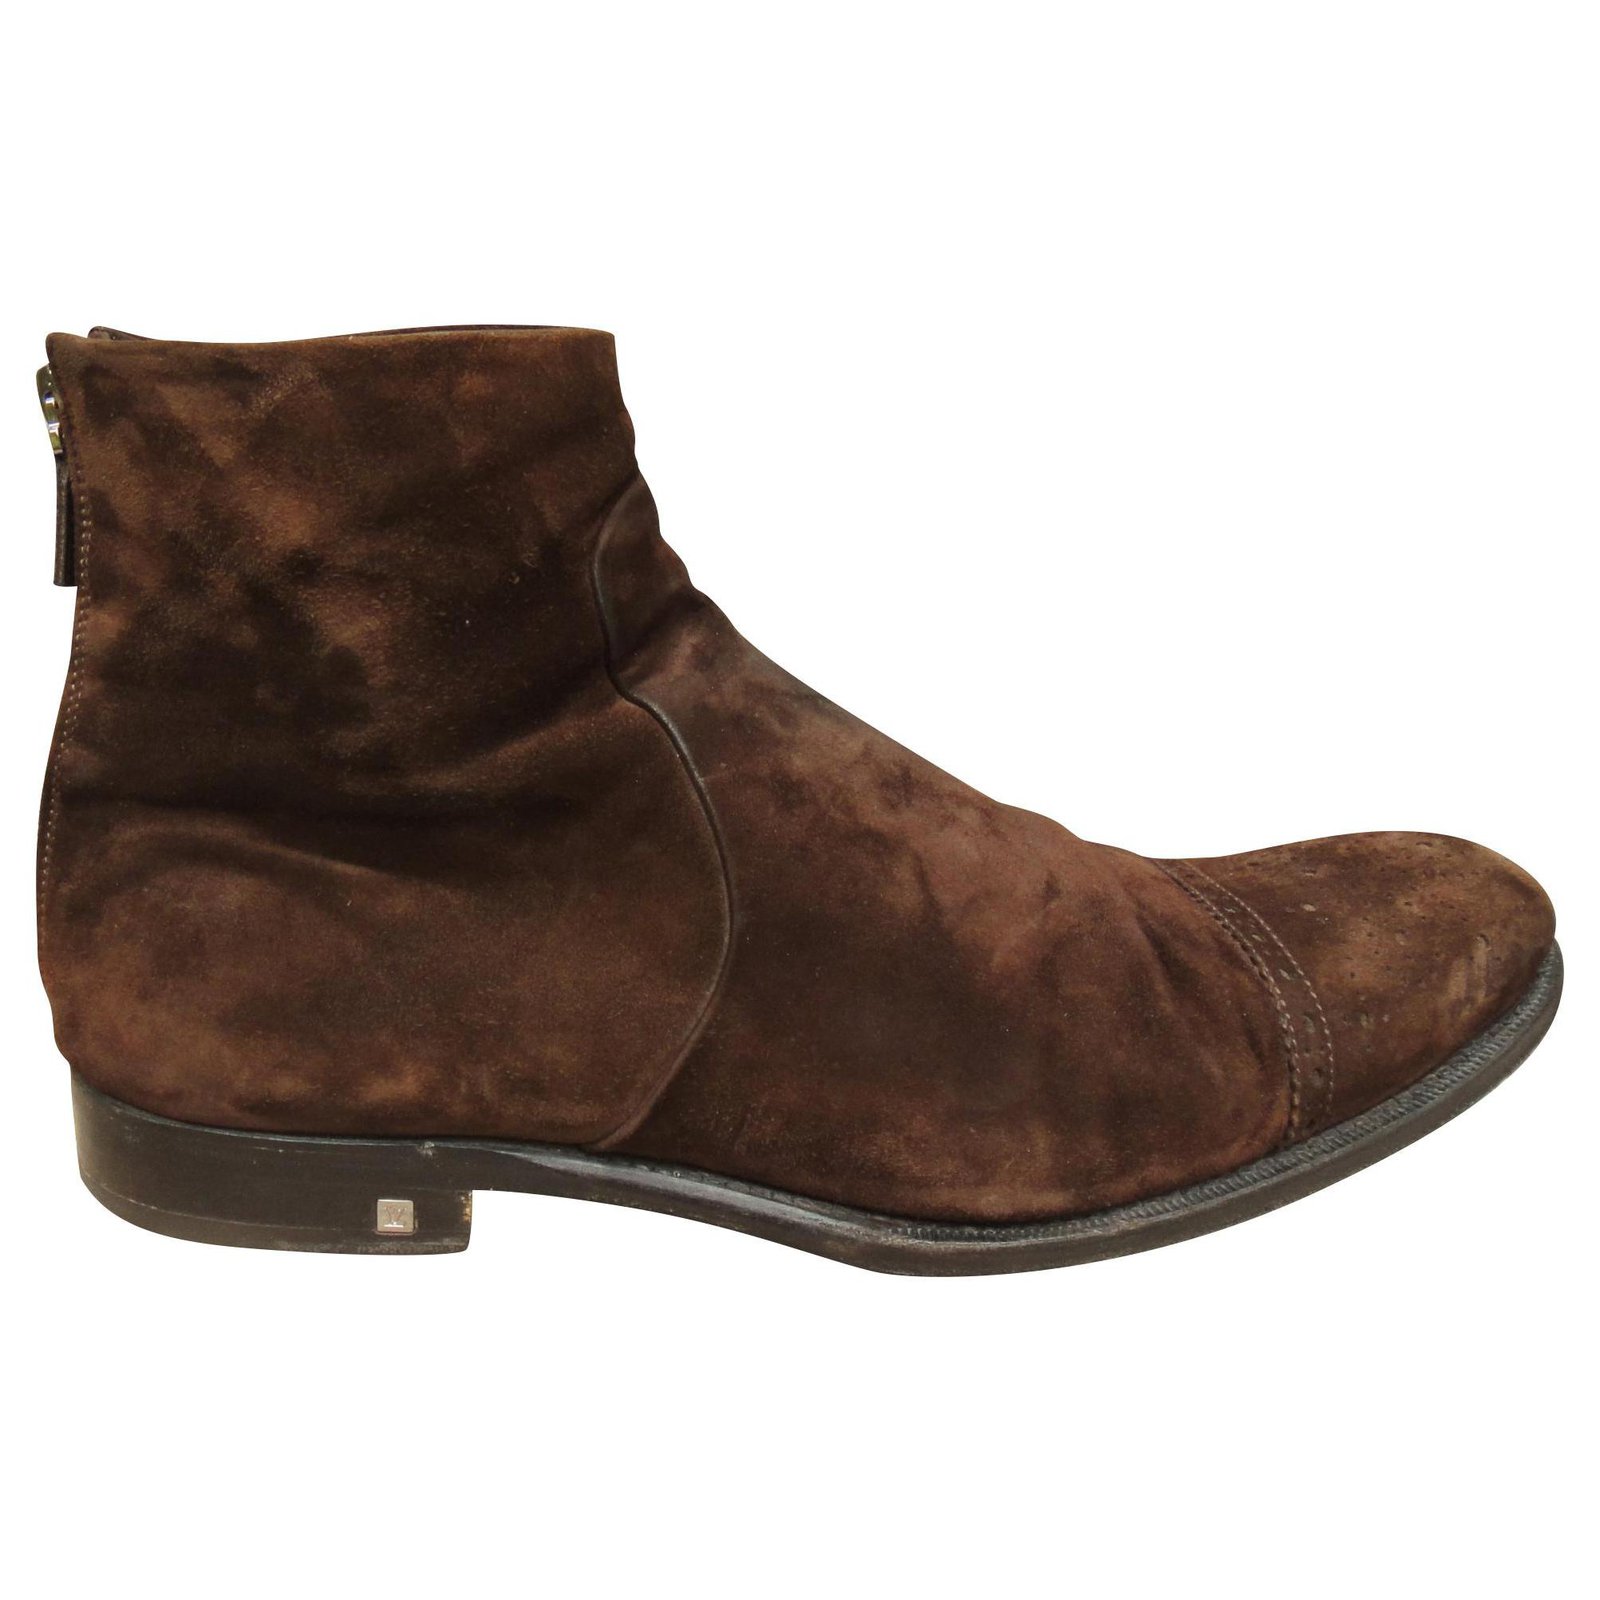 Louis Vuitton Mens Boots, Brown, 11 (Stock Confirmation Required)